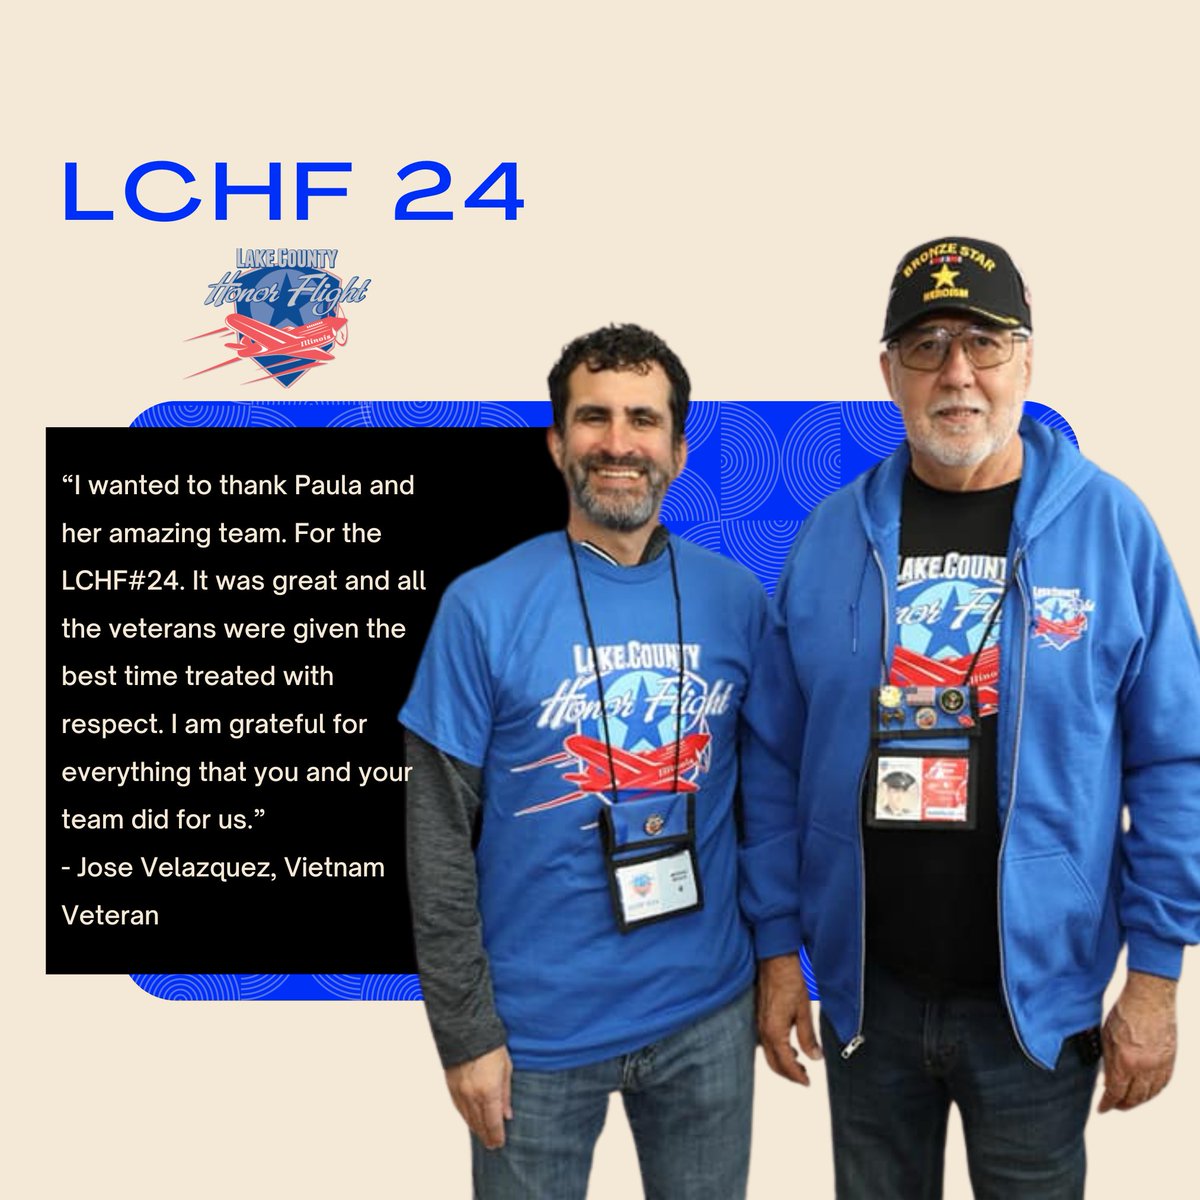 “I wanted to thank Paula and her amazing team. For the LCHF#24. It was great and all the veterans were given the best time treated with respect. I am grateful for everything that you and your team did for us.” - Jose Velazquez, Vietnam Veteran 
#honorflight #LakeCountyHonorFlight